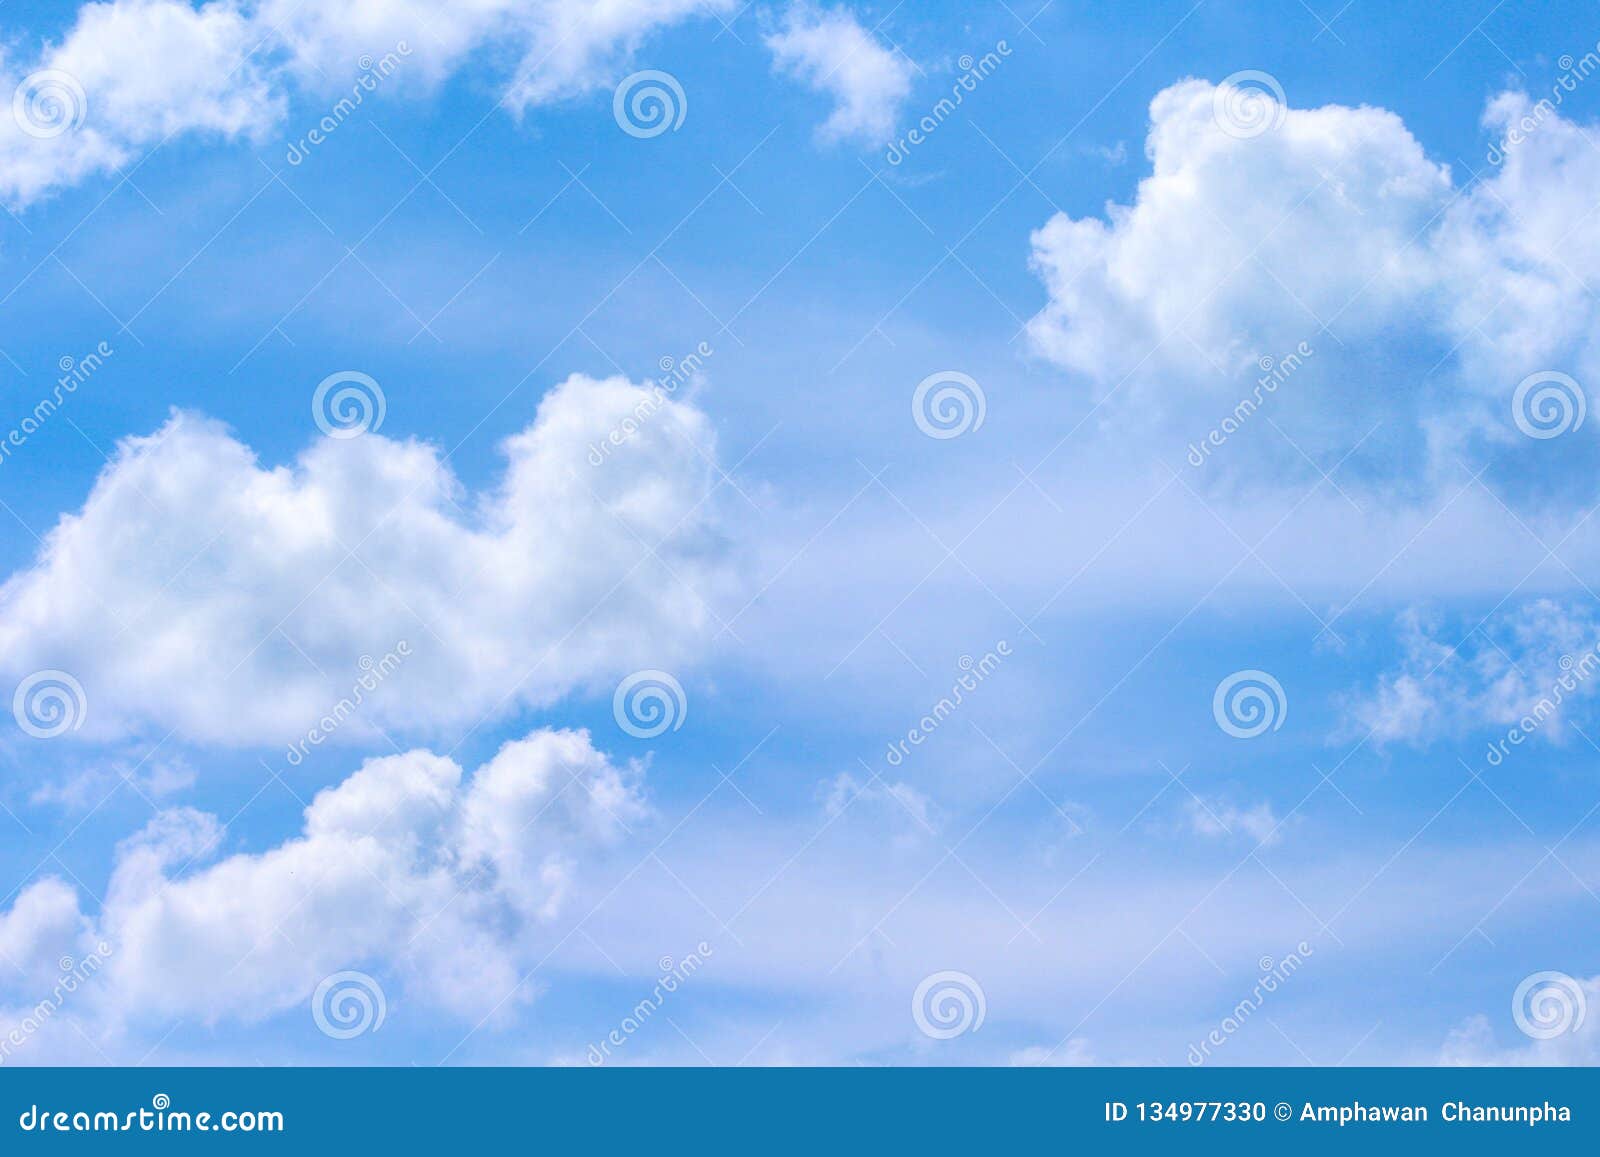 Cloud Groups Patterns on Bright Bluesky Background with Stock Photo ...